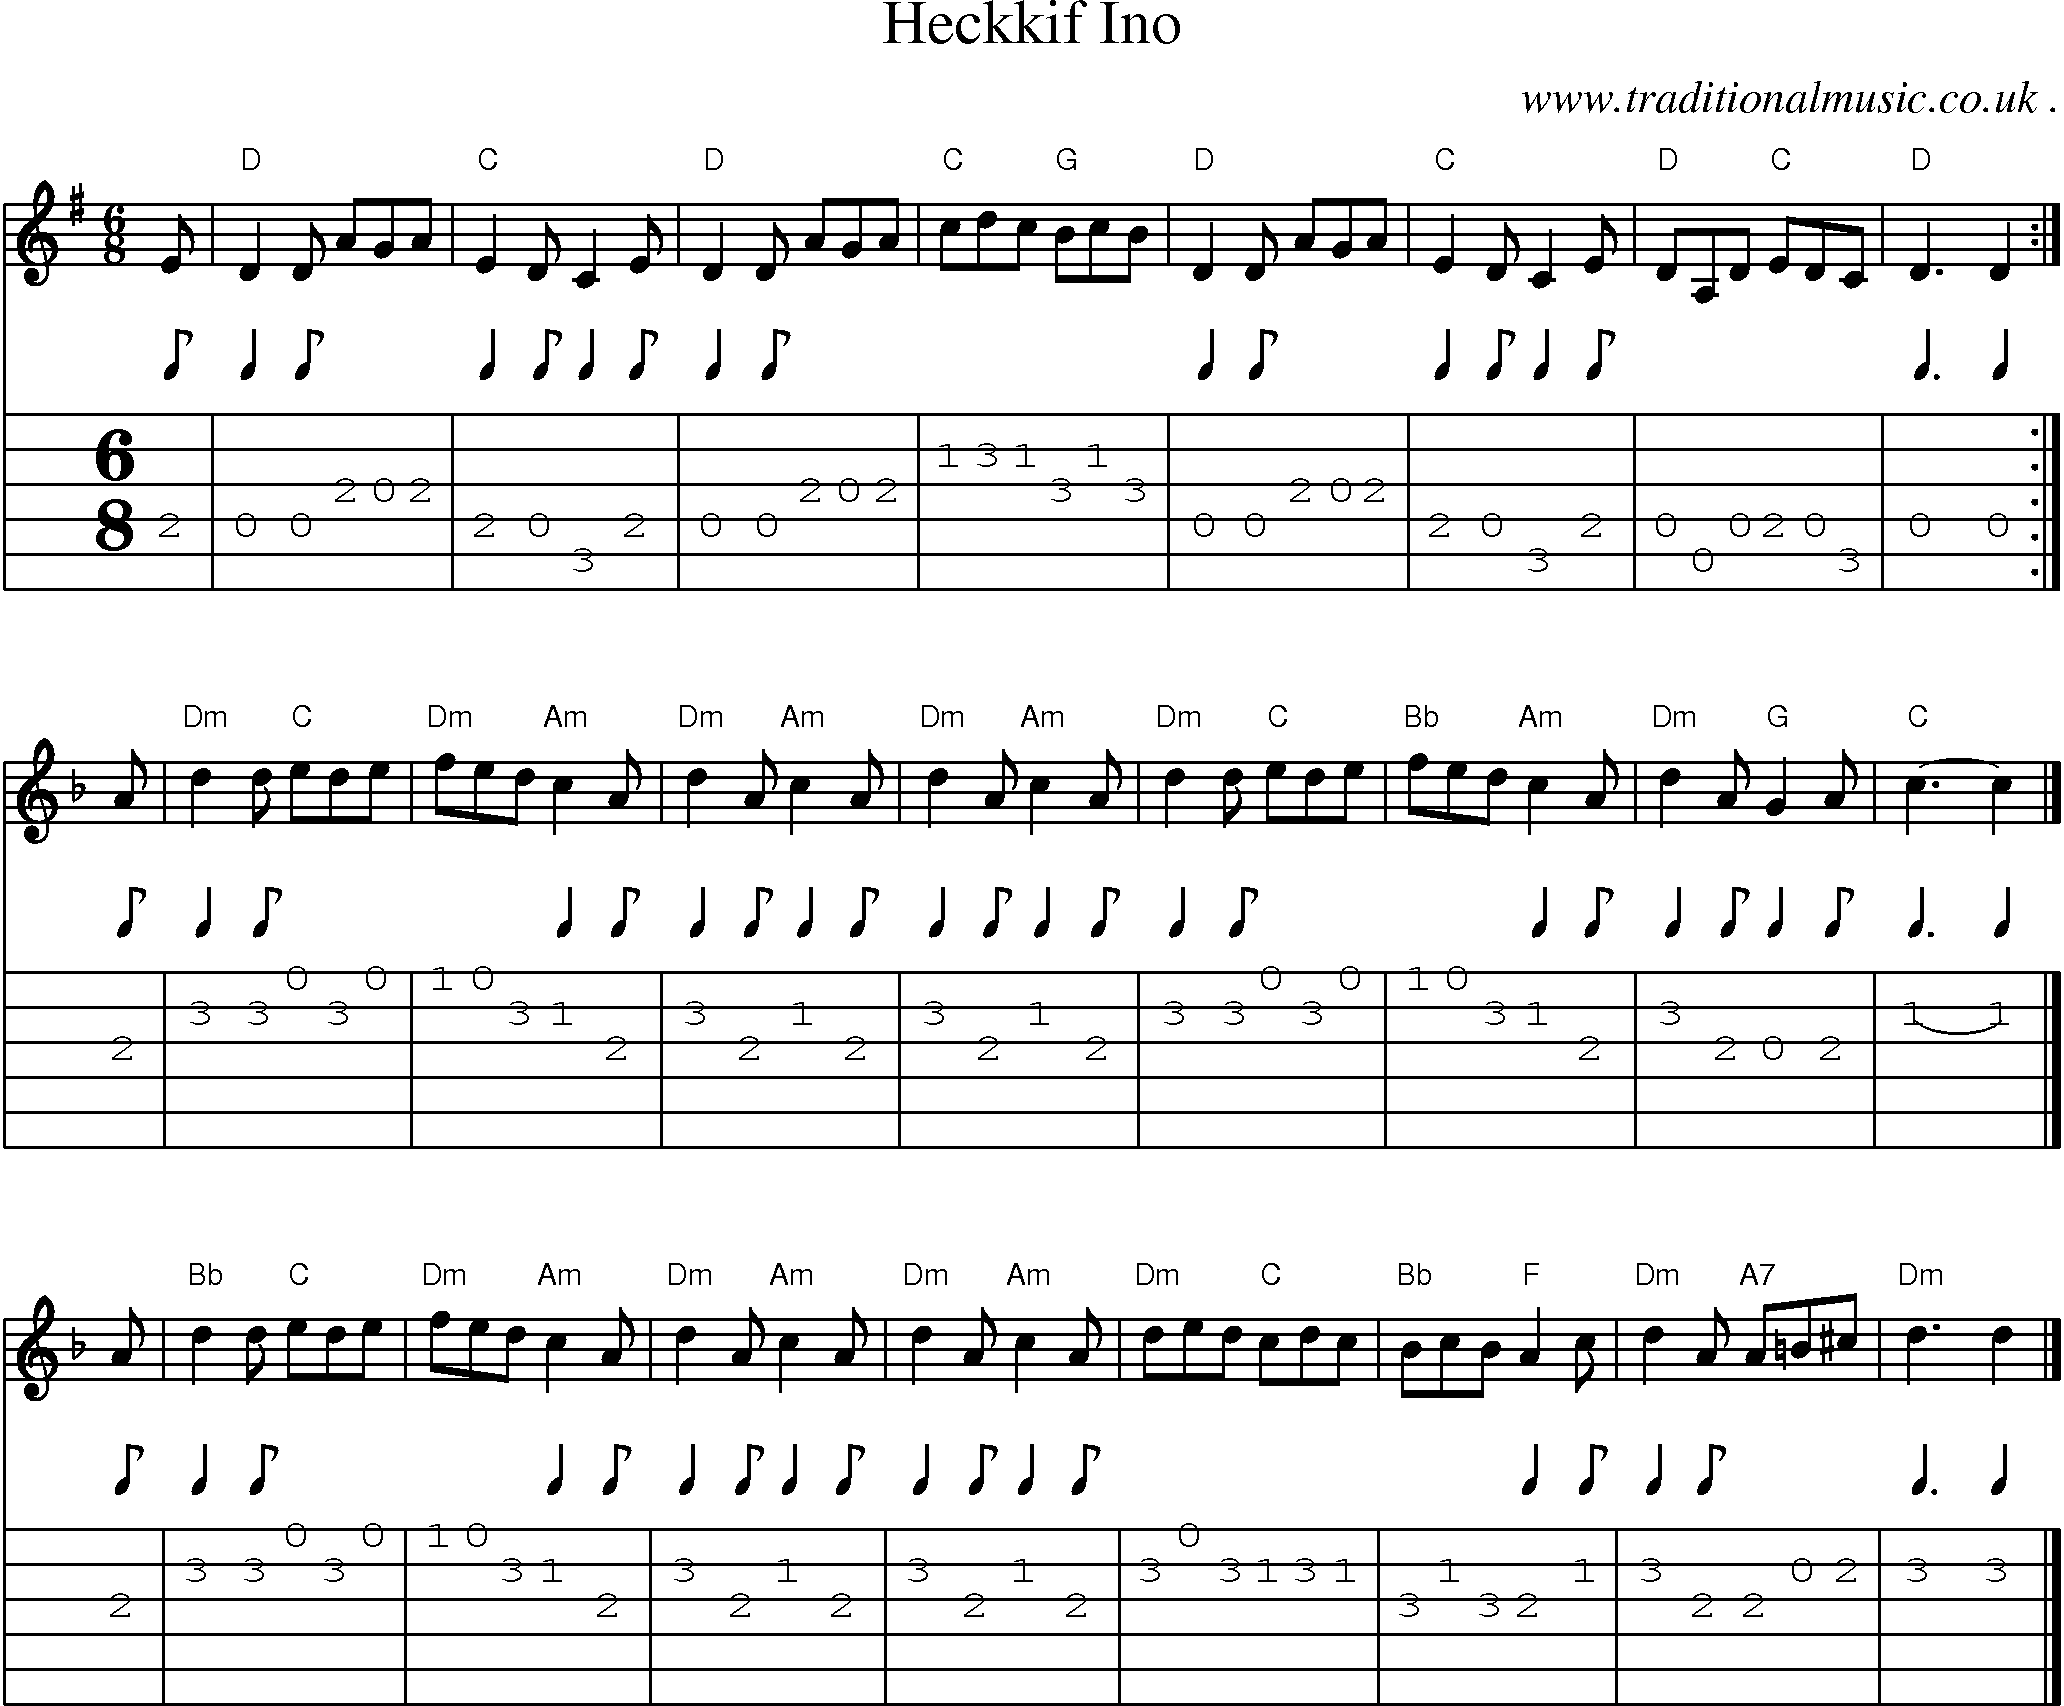 Sheet-music  score, Chords and Guitar Tabs for Heckkif Ino